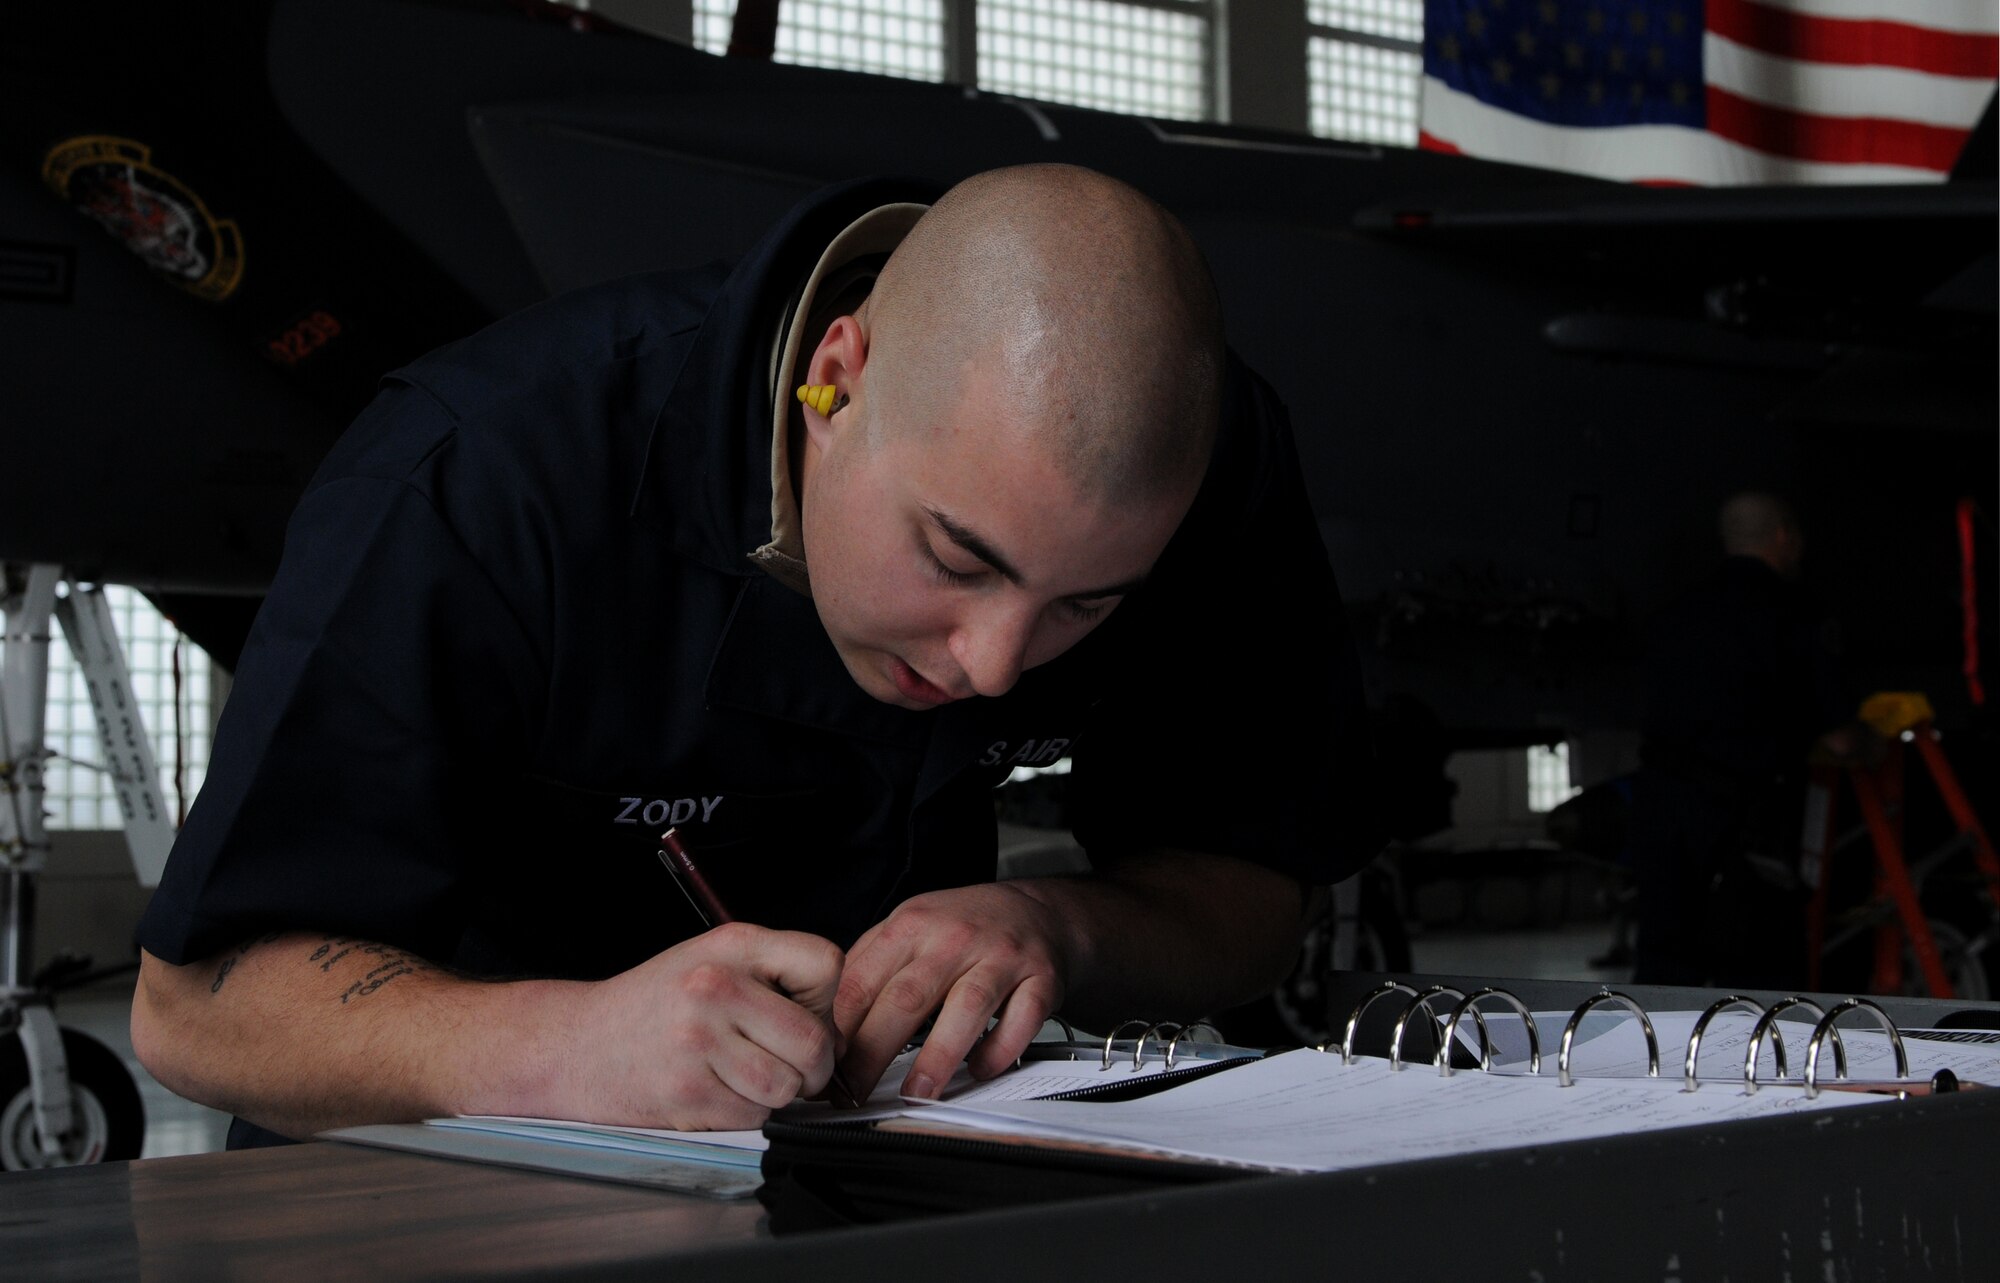 U.S. Air Force Senior Airman Caleb Zody, 391st Aircraft Maintenance Unit weapons load team crewman, writes down information during weapons load competition at Mountain Home Air Force Base, Idaho, April 5, 2013. The competition allows the top crew from each unit to compete against each other to see which team can complete the weapons load the quickest and most accurately. (U.S. Air Force photo/Senior Airman Heather Hayward)